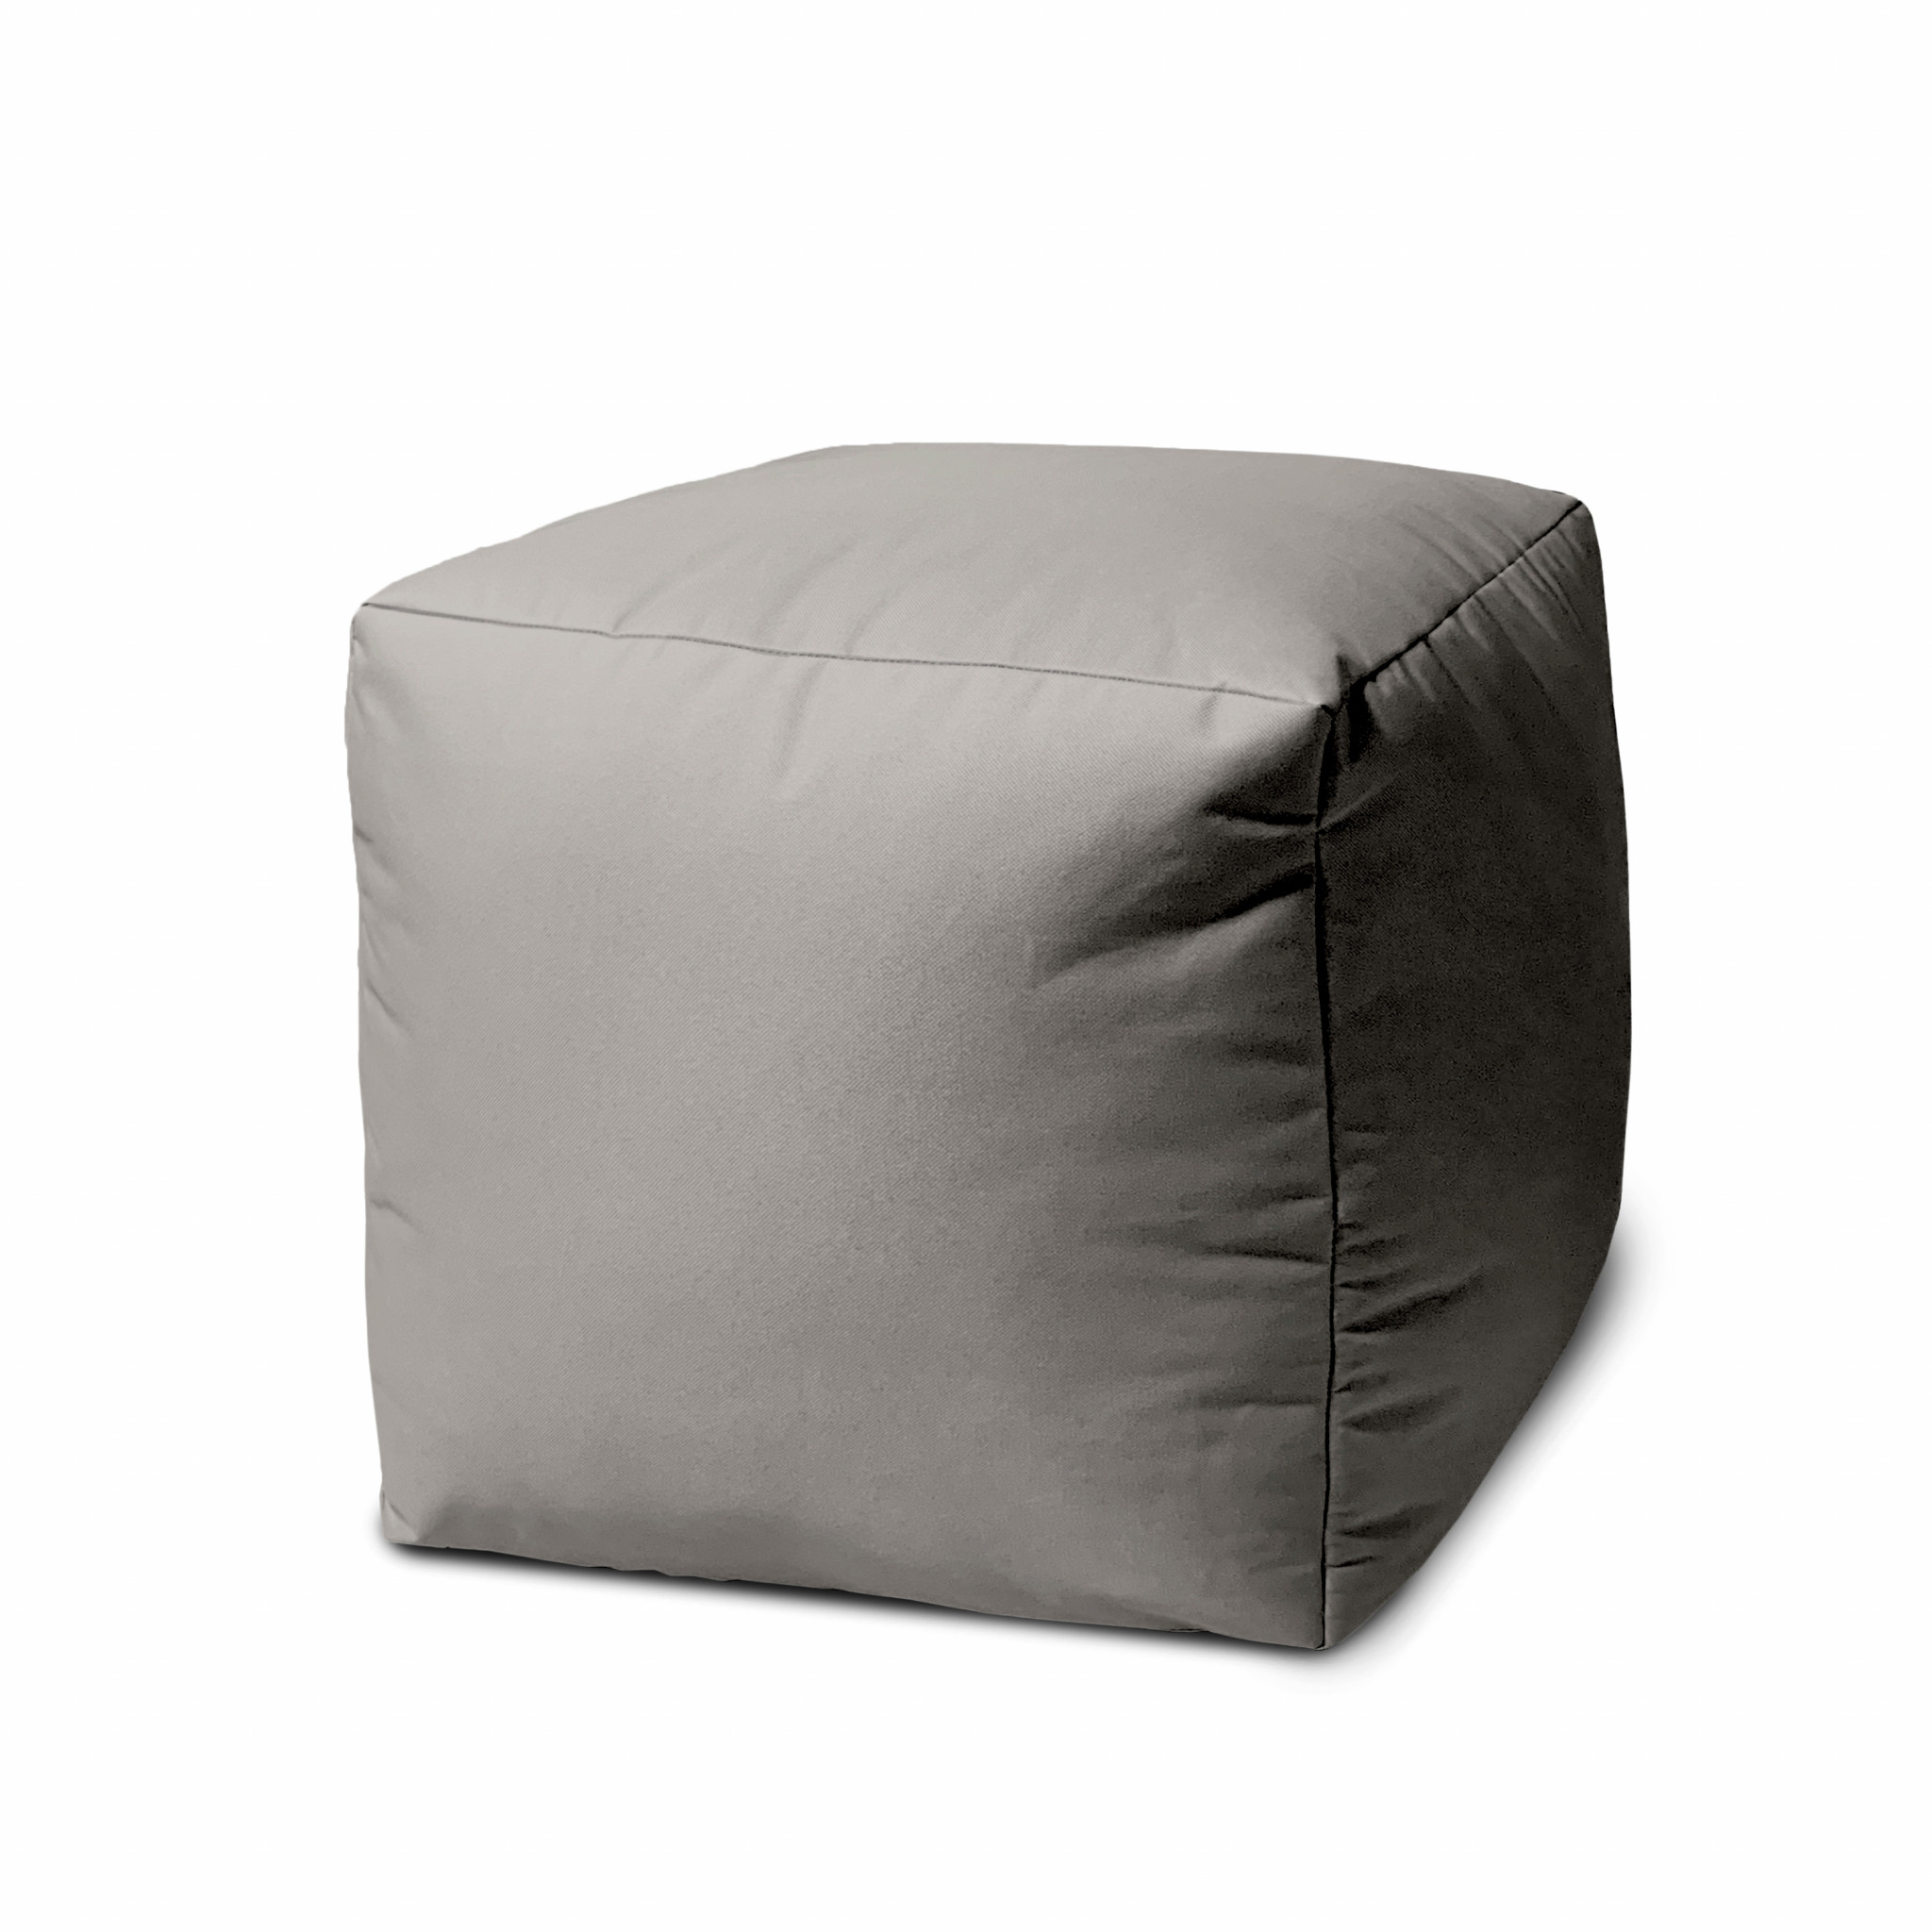 17" Cool Steely Silver Gray Solid Color Indoor Outdoor Pouf Ottoman-474165-1